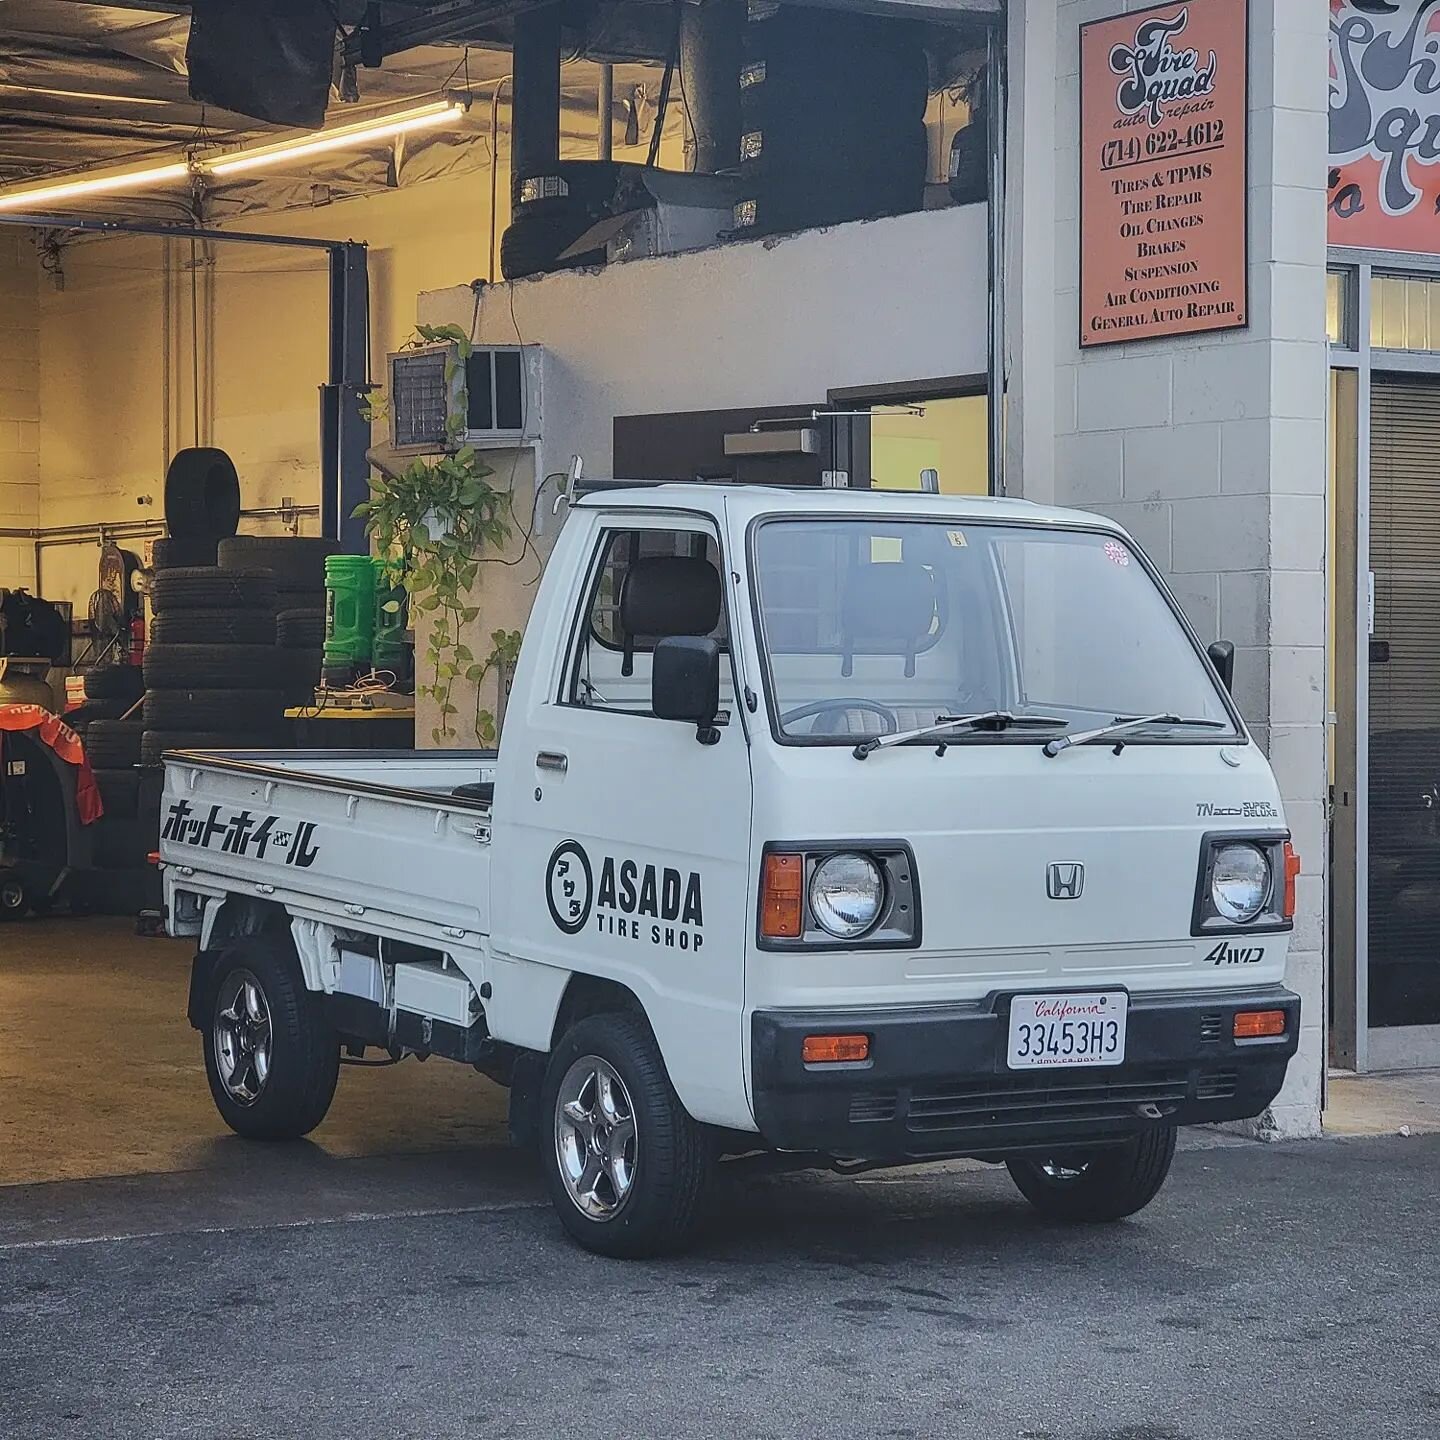 We love seeing uncommon cars and trucks at Tire Squad! This was a real treat. Enjoy the new wheels and tires @mattgabe! 
.
.
.
#honda #acty #4wd #tiresquad #tiresquadwestminster